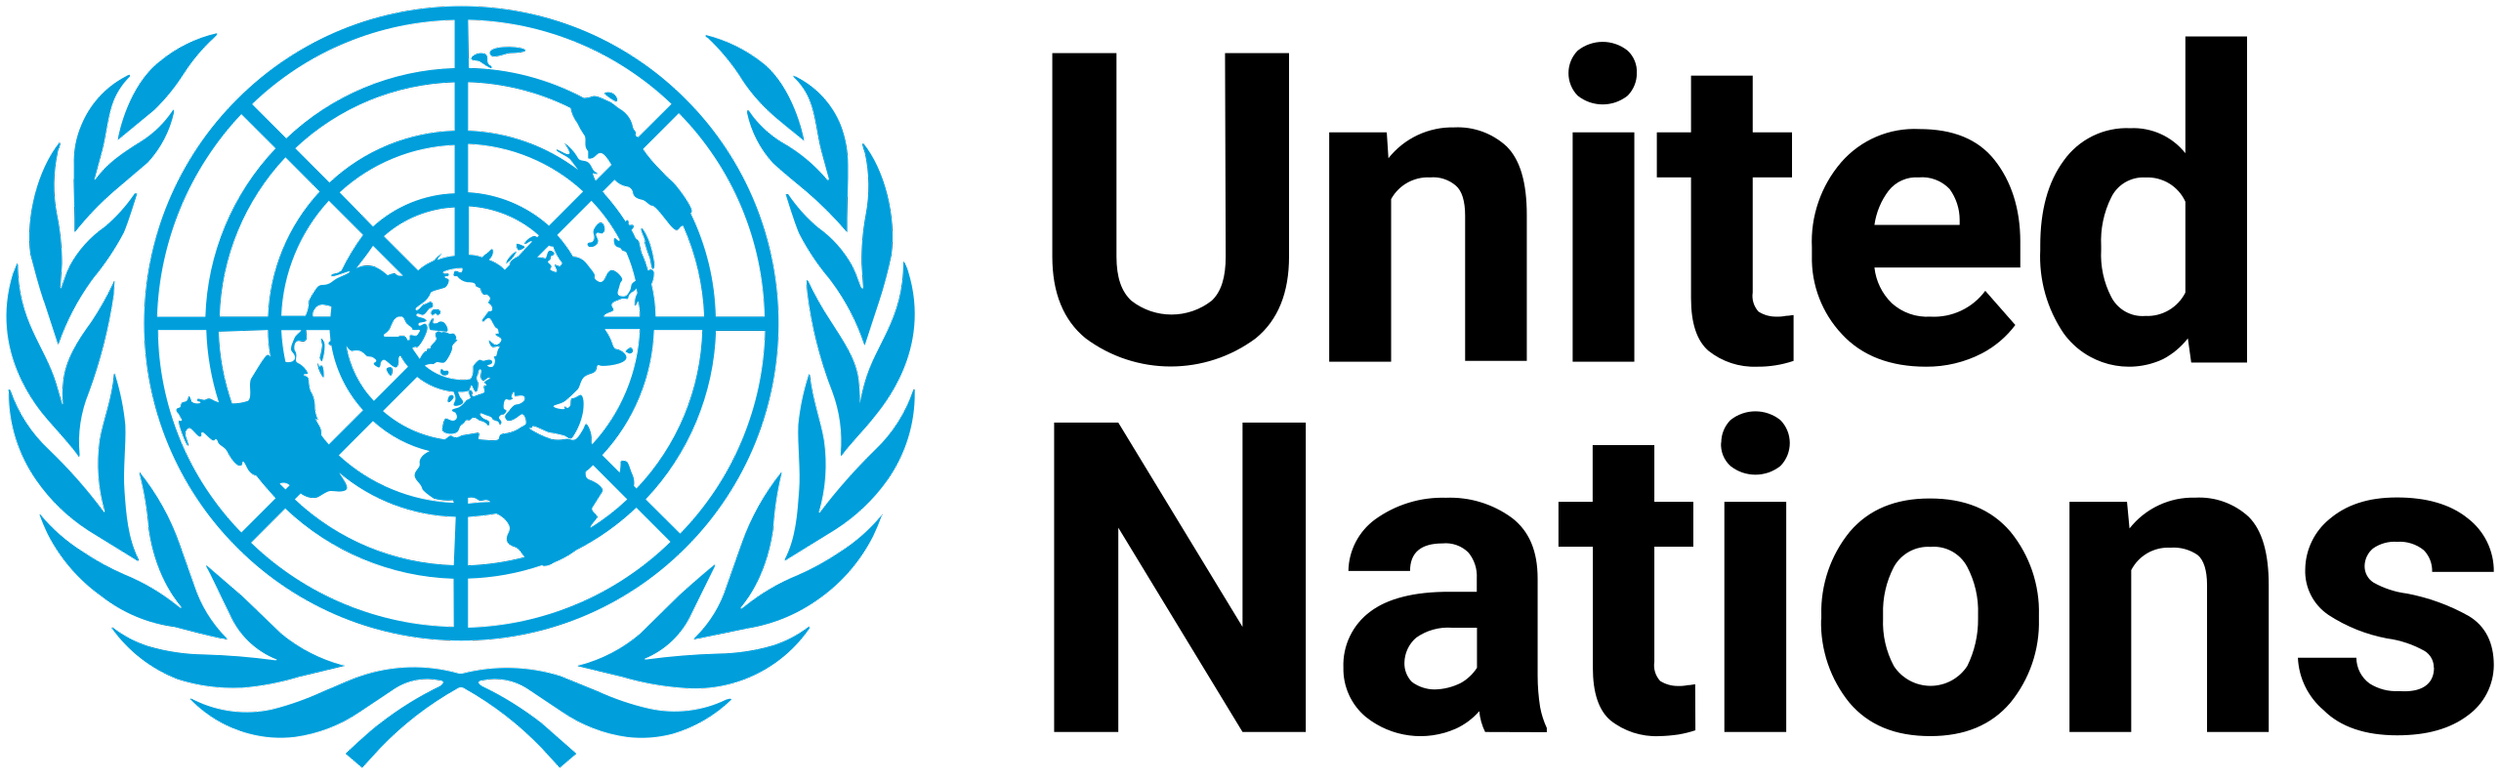 Logo_of_the_United_Nations.svg.png